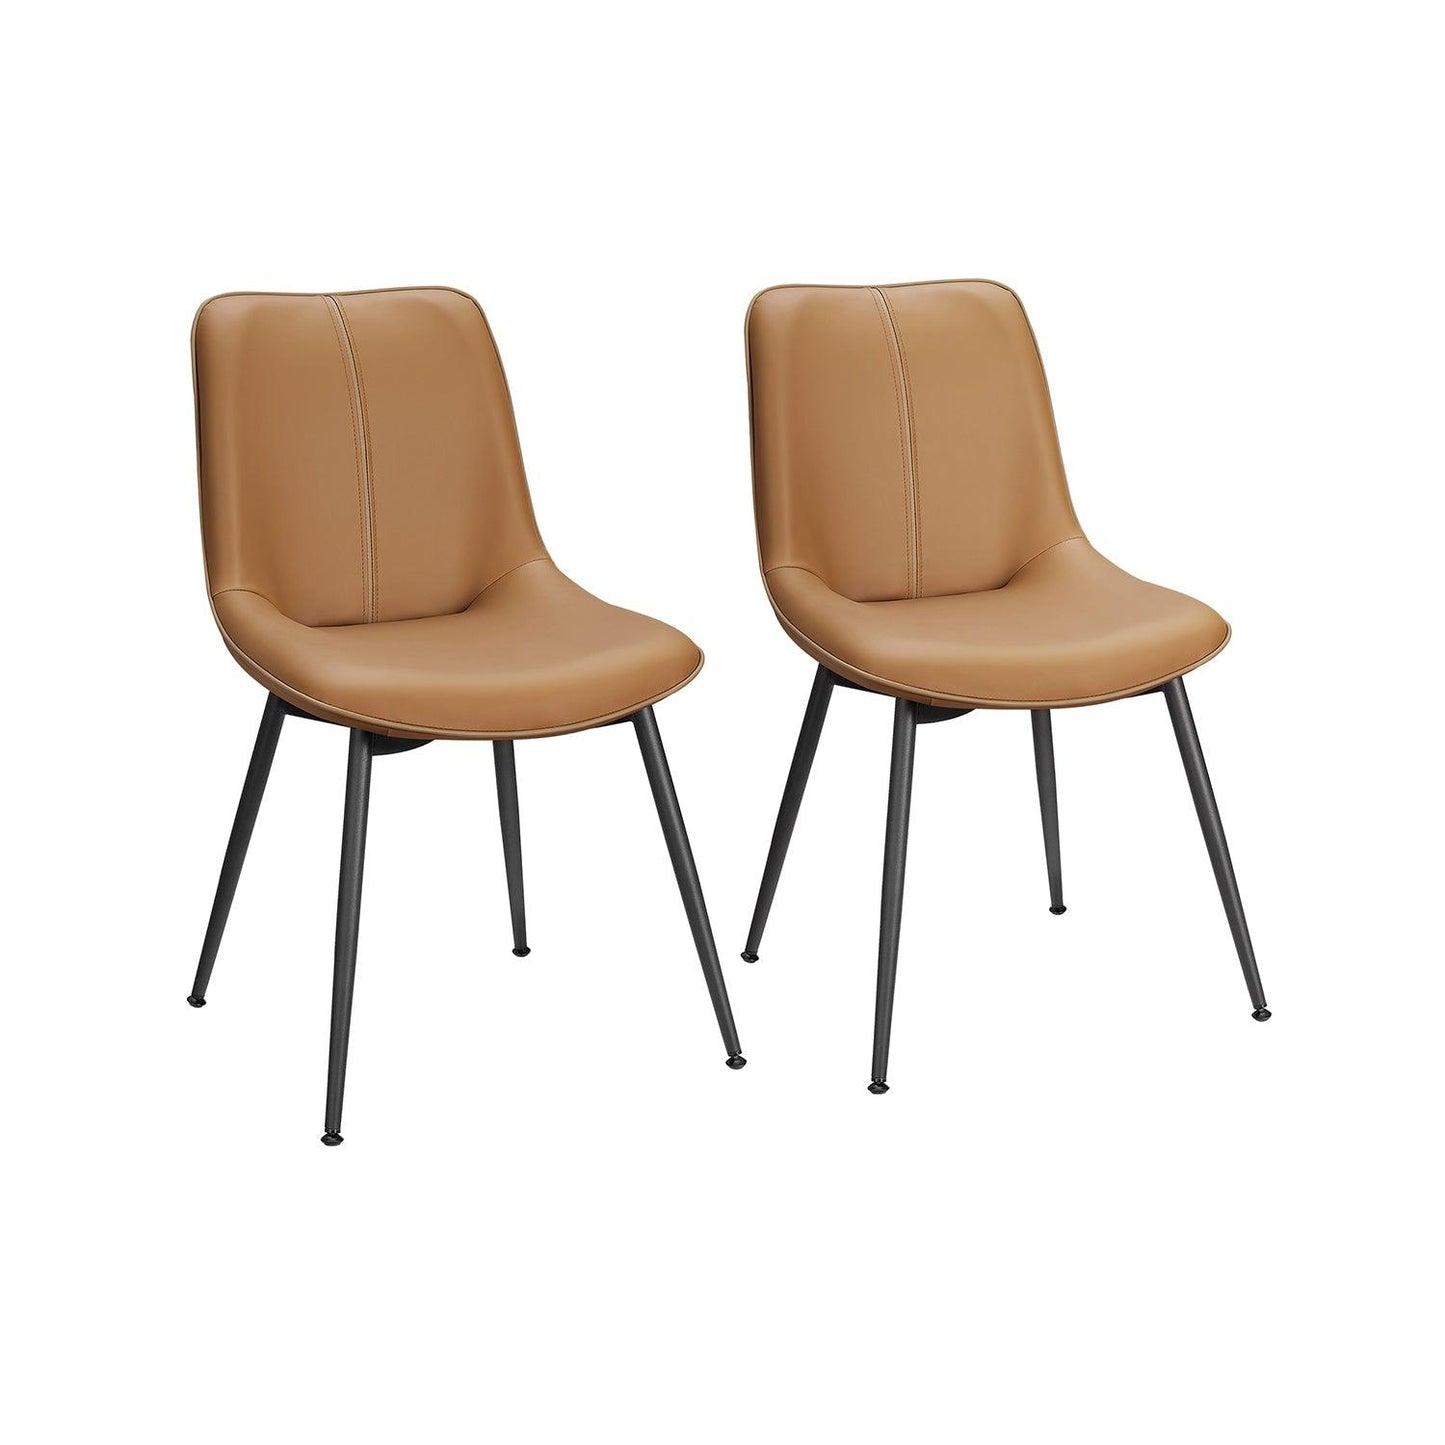 Set of 2 Upholstered Leather Dining Chairs Caramel Brown